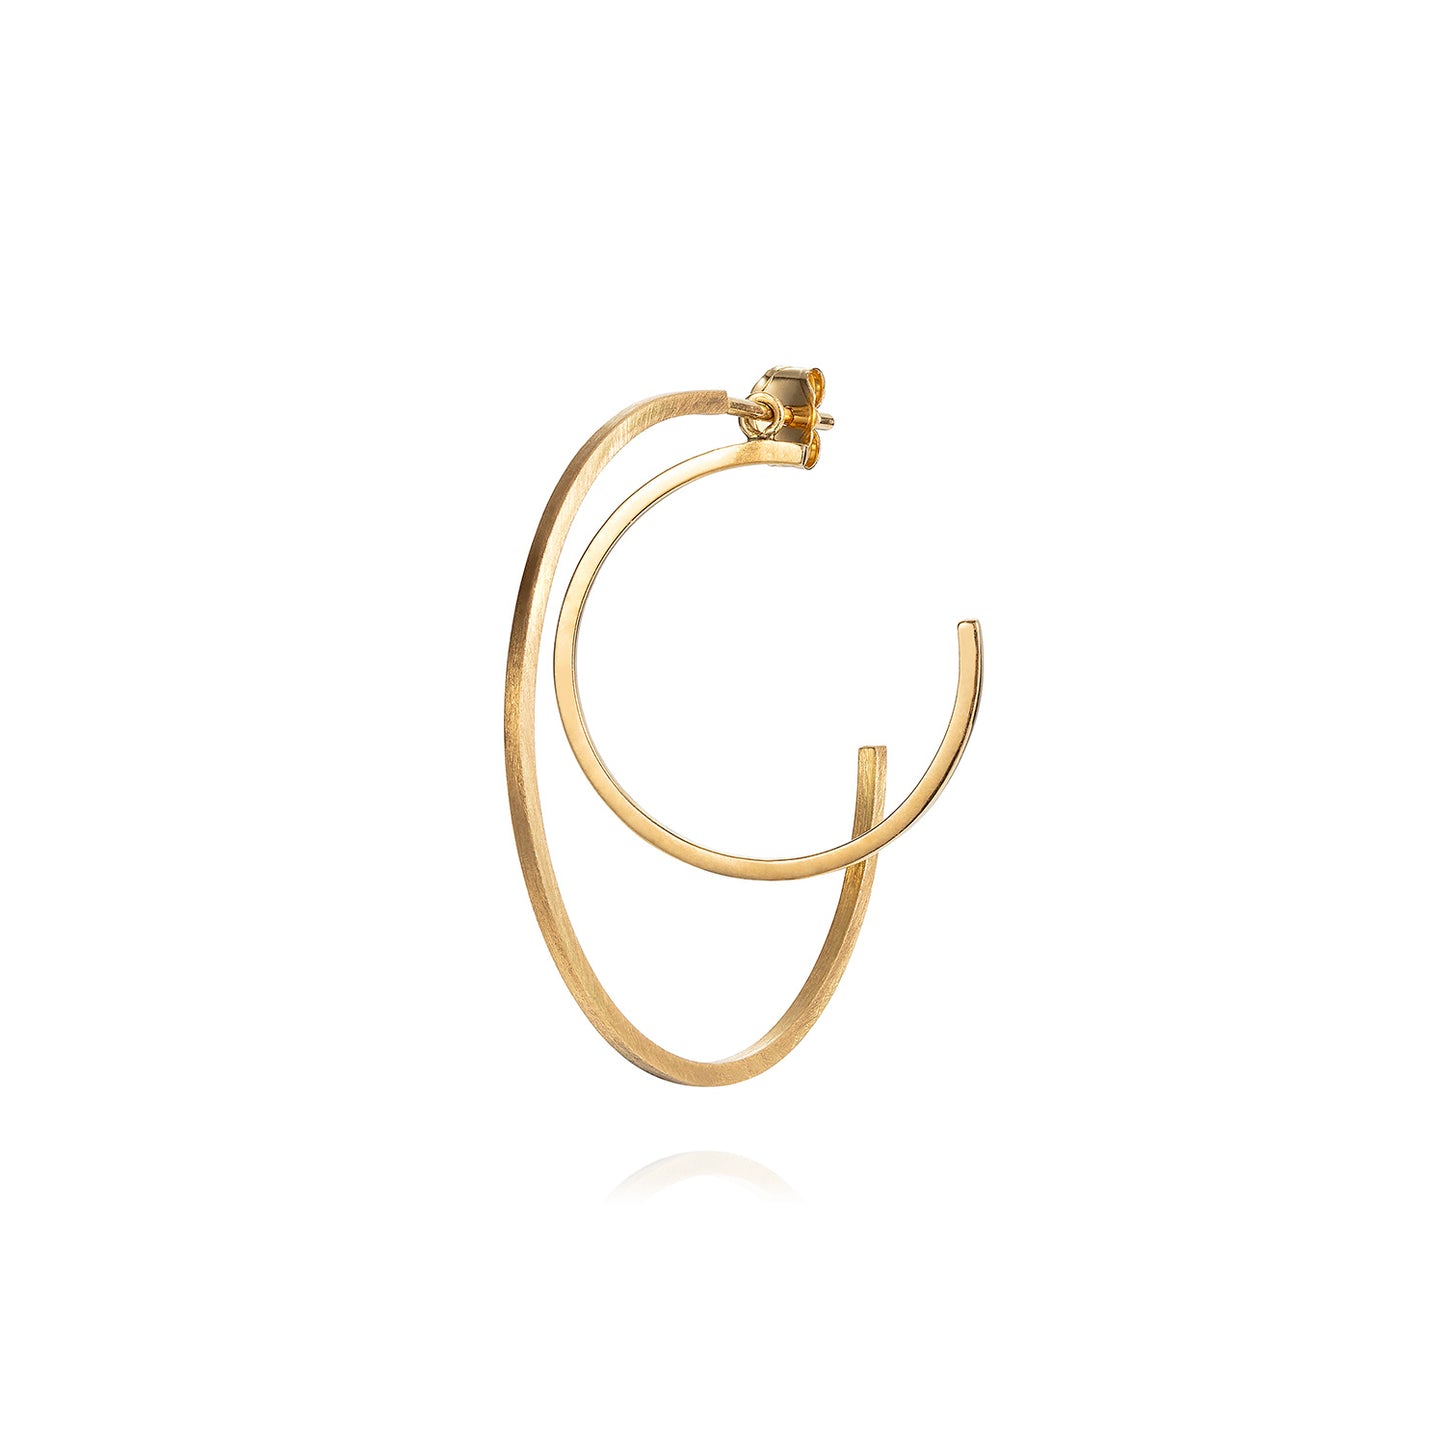 Sweet Pea Precious Maze 18ct gold brushed finish small circle add-on seen on brushed small round hoop earring